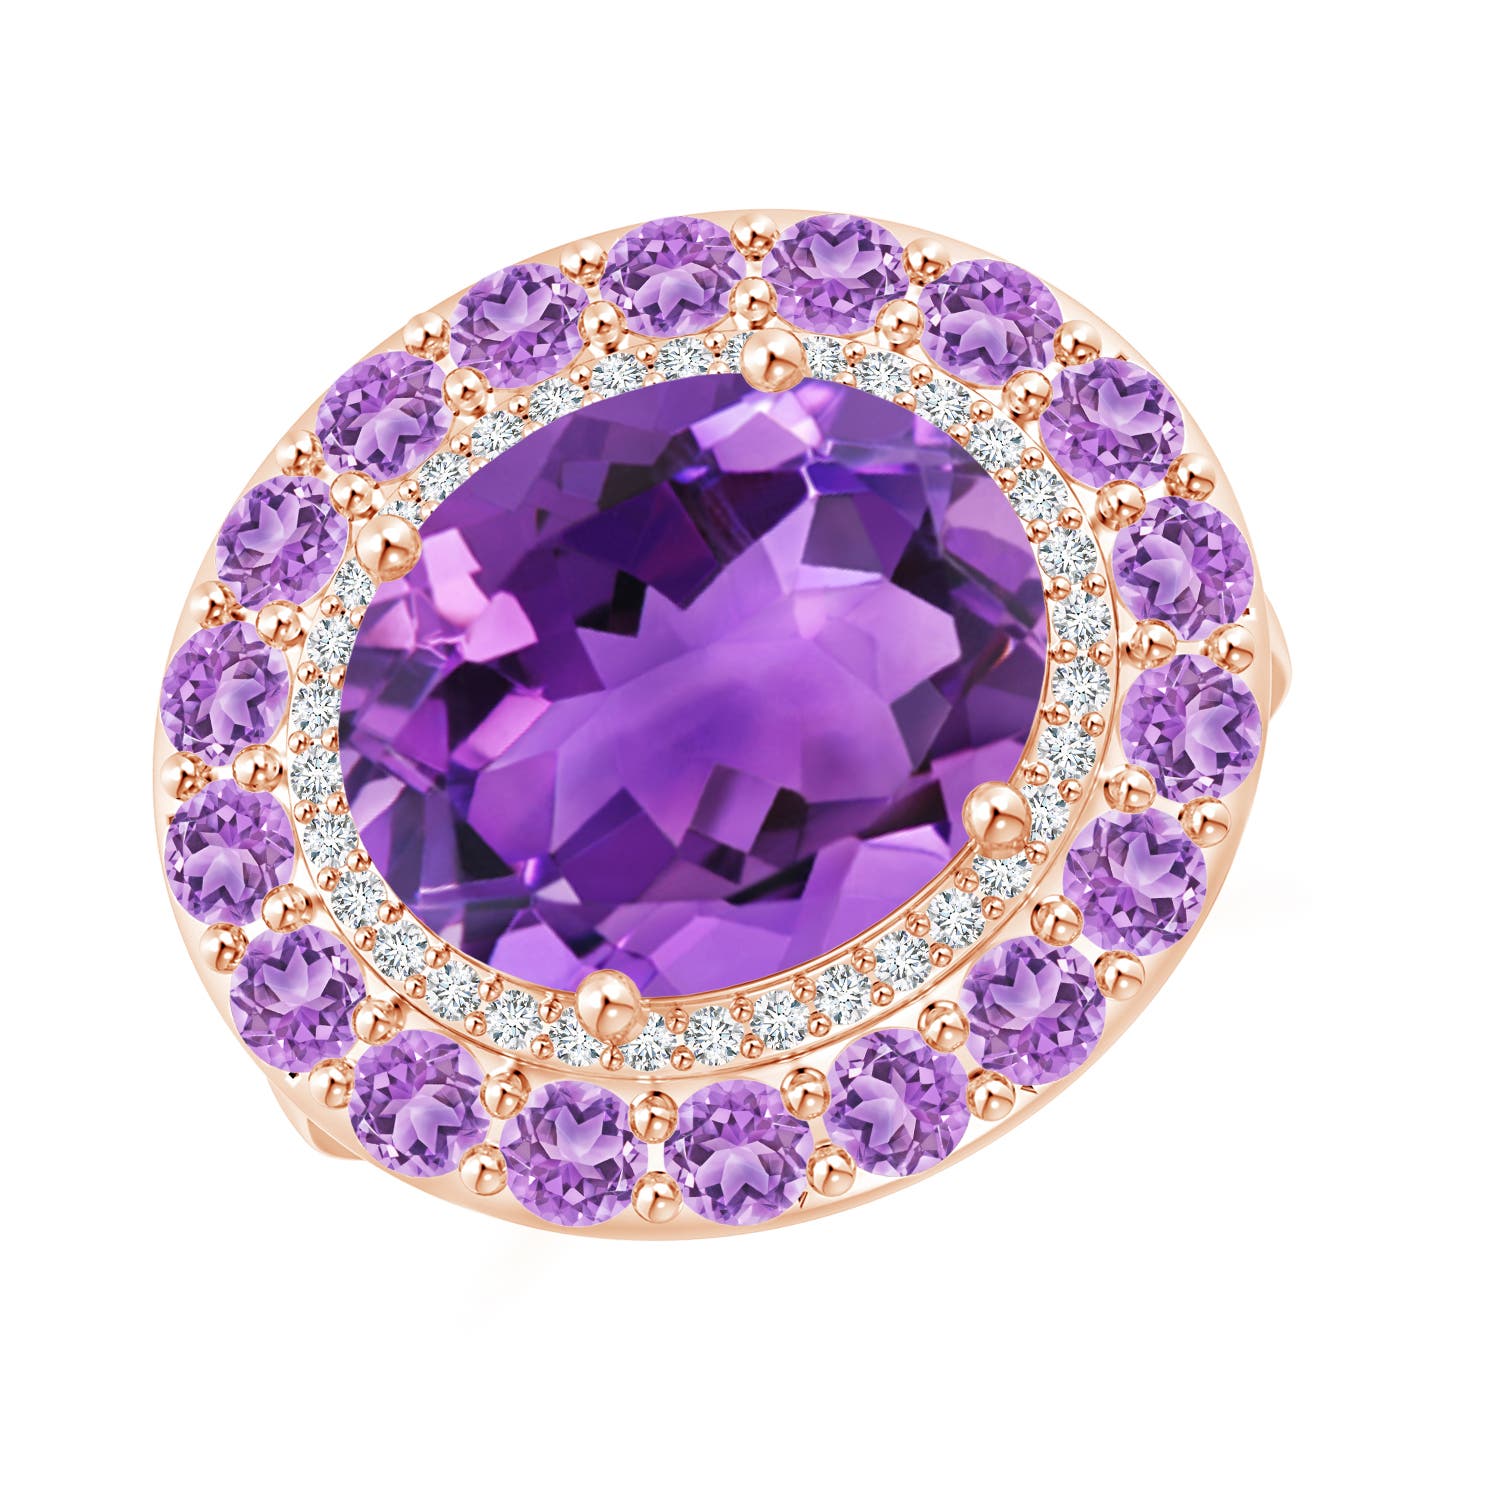 AAA - Amethyst / 5.55 CT / 14 KT Rose Gold